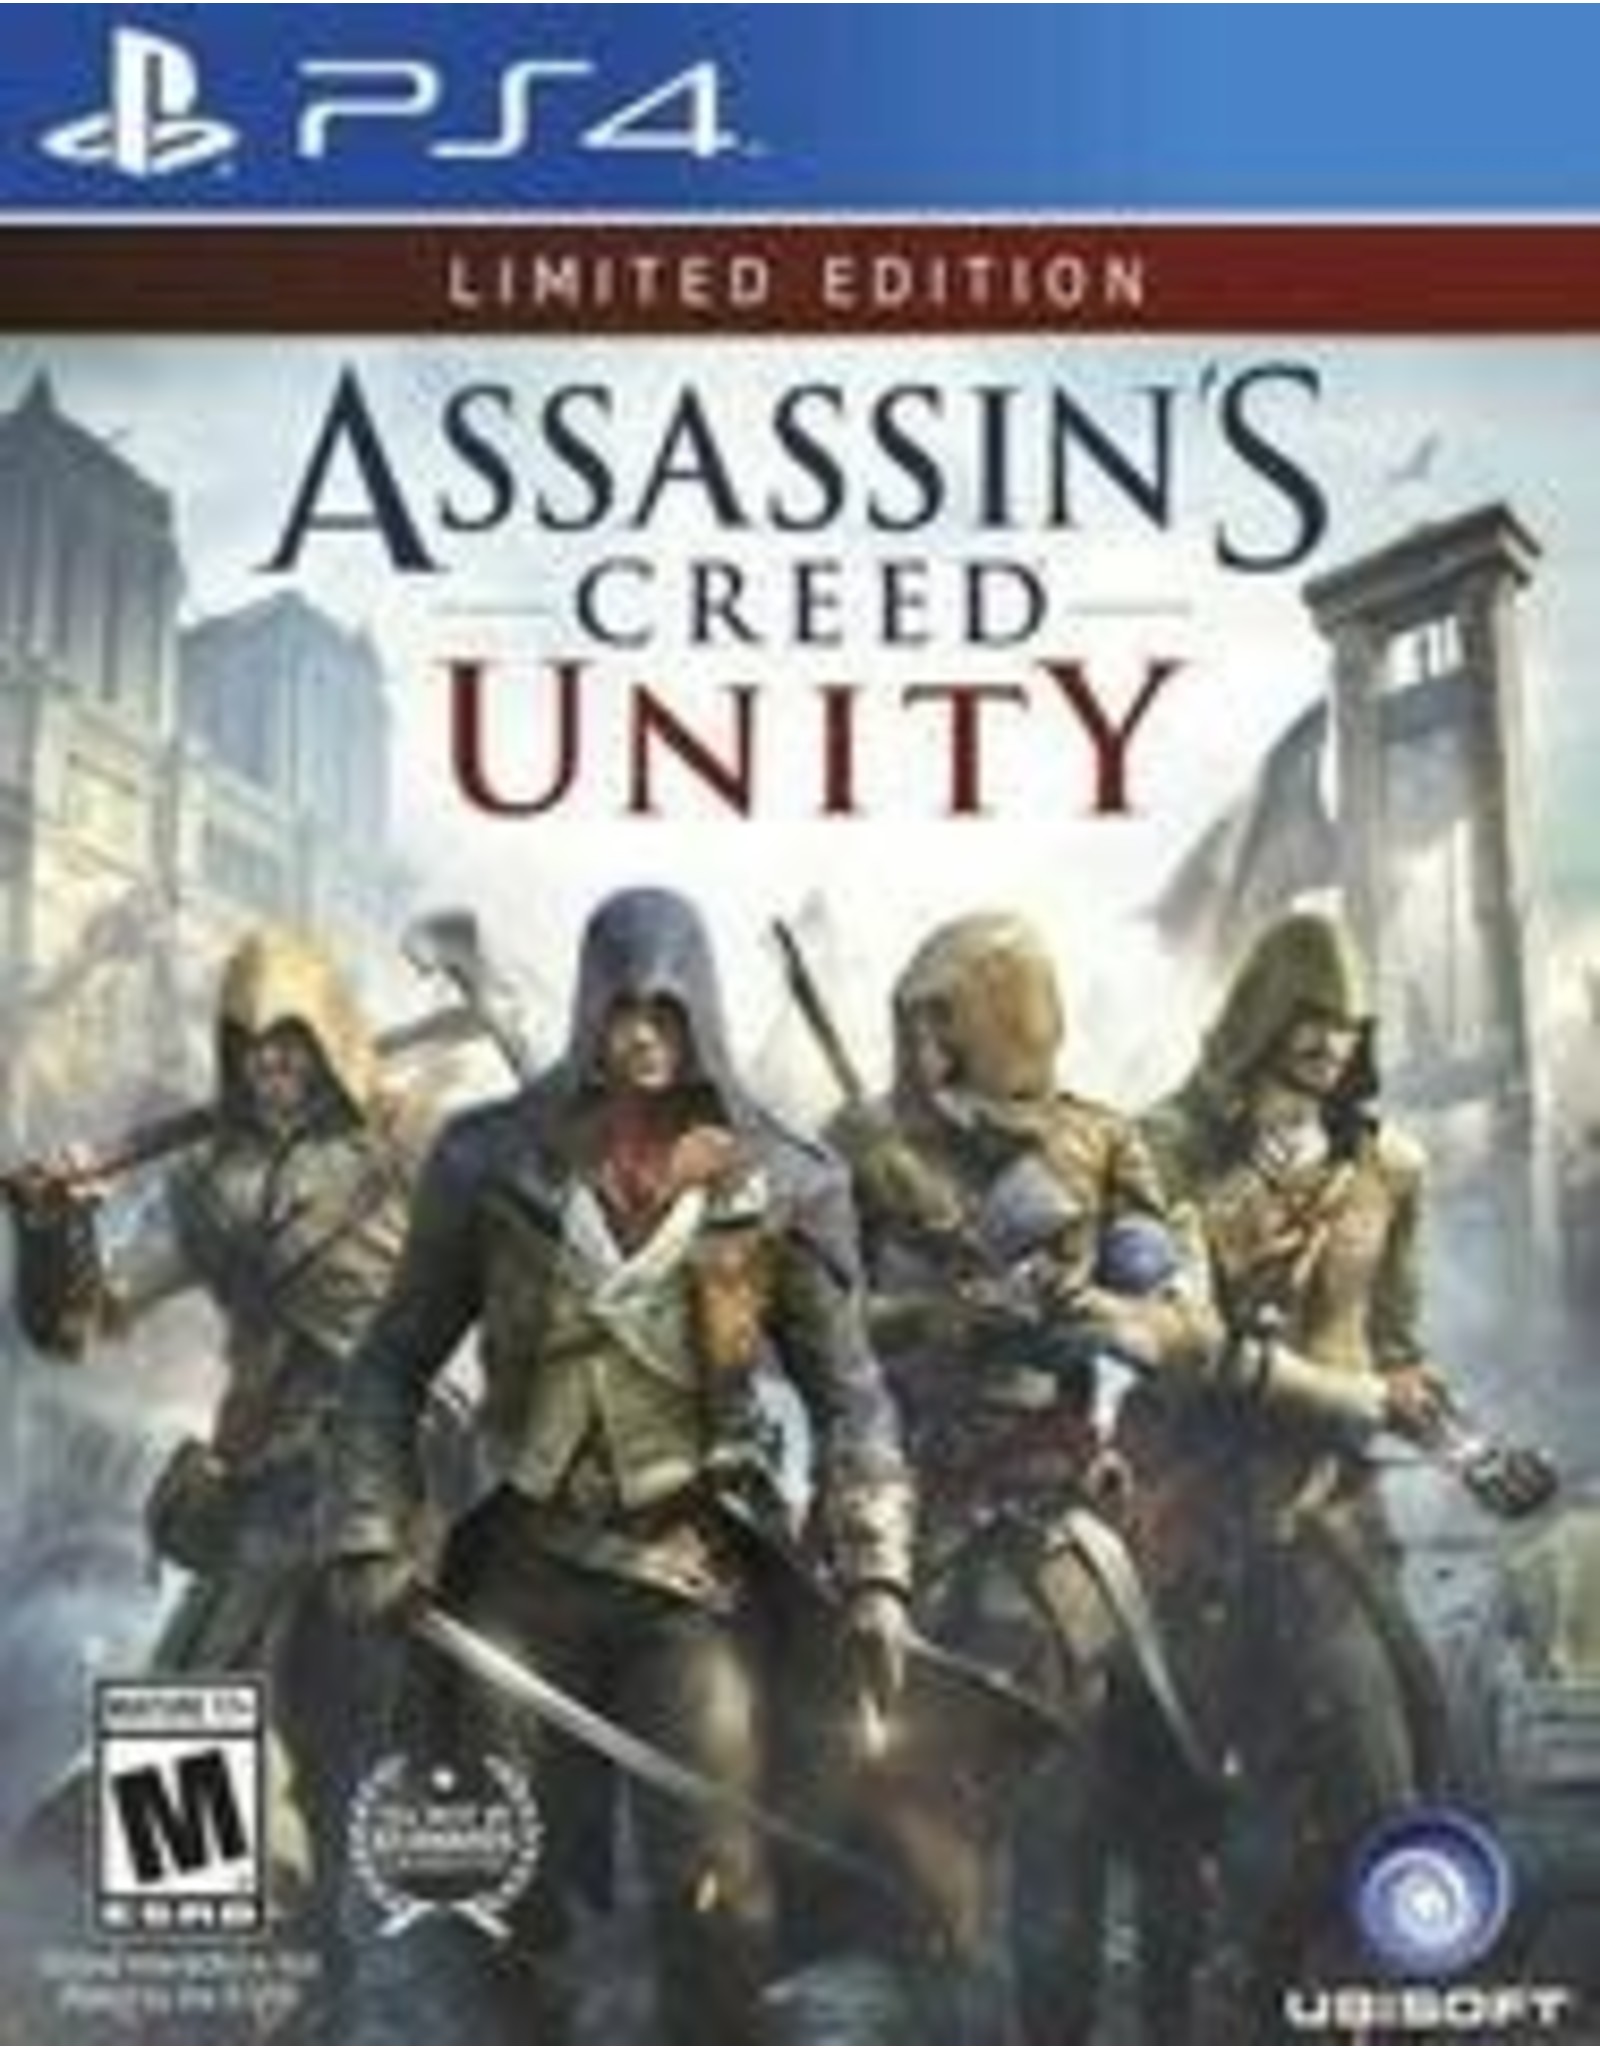 Playstation 4 Assassin's Creed Unity (Limited Edition, No DLC)